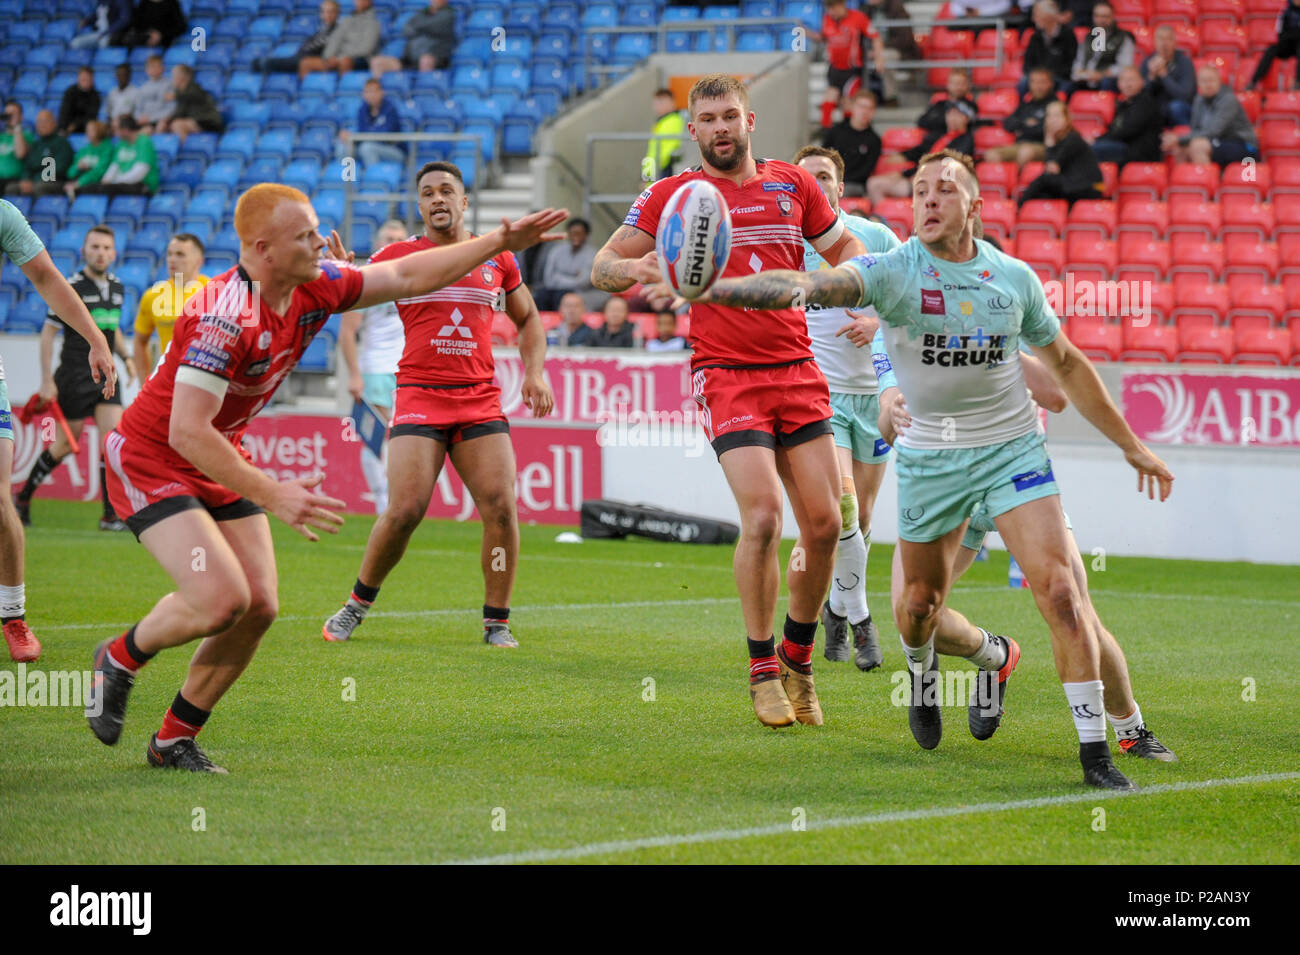 Salford, UK. 14th Jun, 2018. Thursday 14th June 2018 , AJ Bell Stadium, Salford, England; Betfred Super League, Salford Red Devils v Widnes Vikings; Danny Craven of Widnes Vikings prevents Josh Wood of Salford Red Devils puncing on the ball for a try Credit: News Images /Alamy Live News Stock Photo